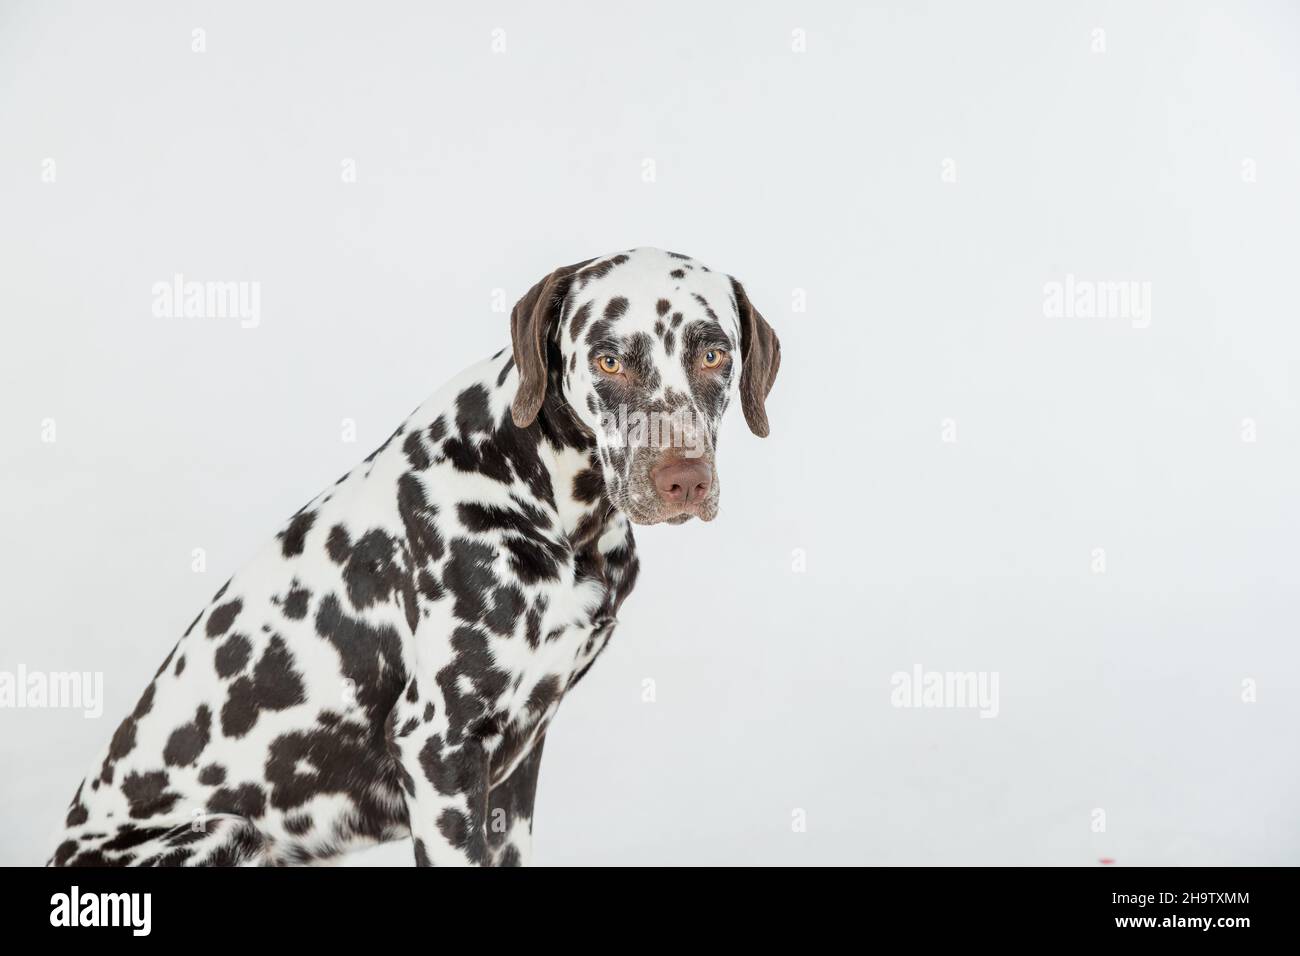 Dalmatian dog sitting looking in the camera at a white background Stock Photo